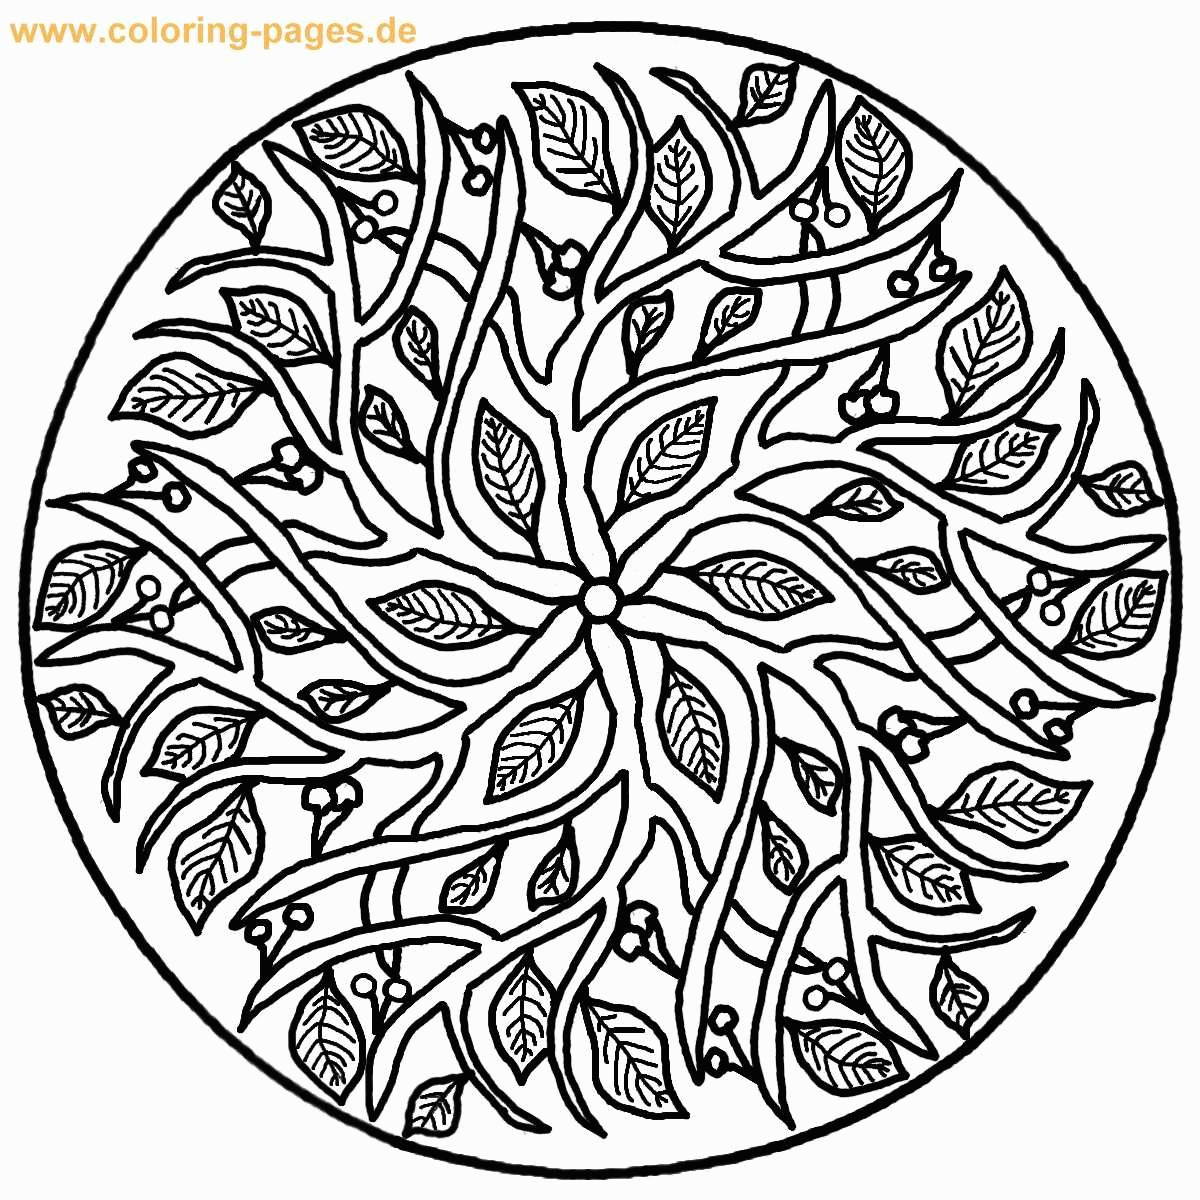 Free Printable Hard Coloring Pages For S - High Quality Coloring Pages